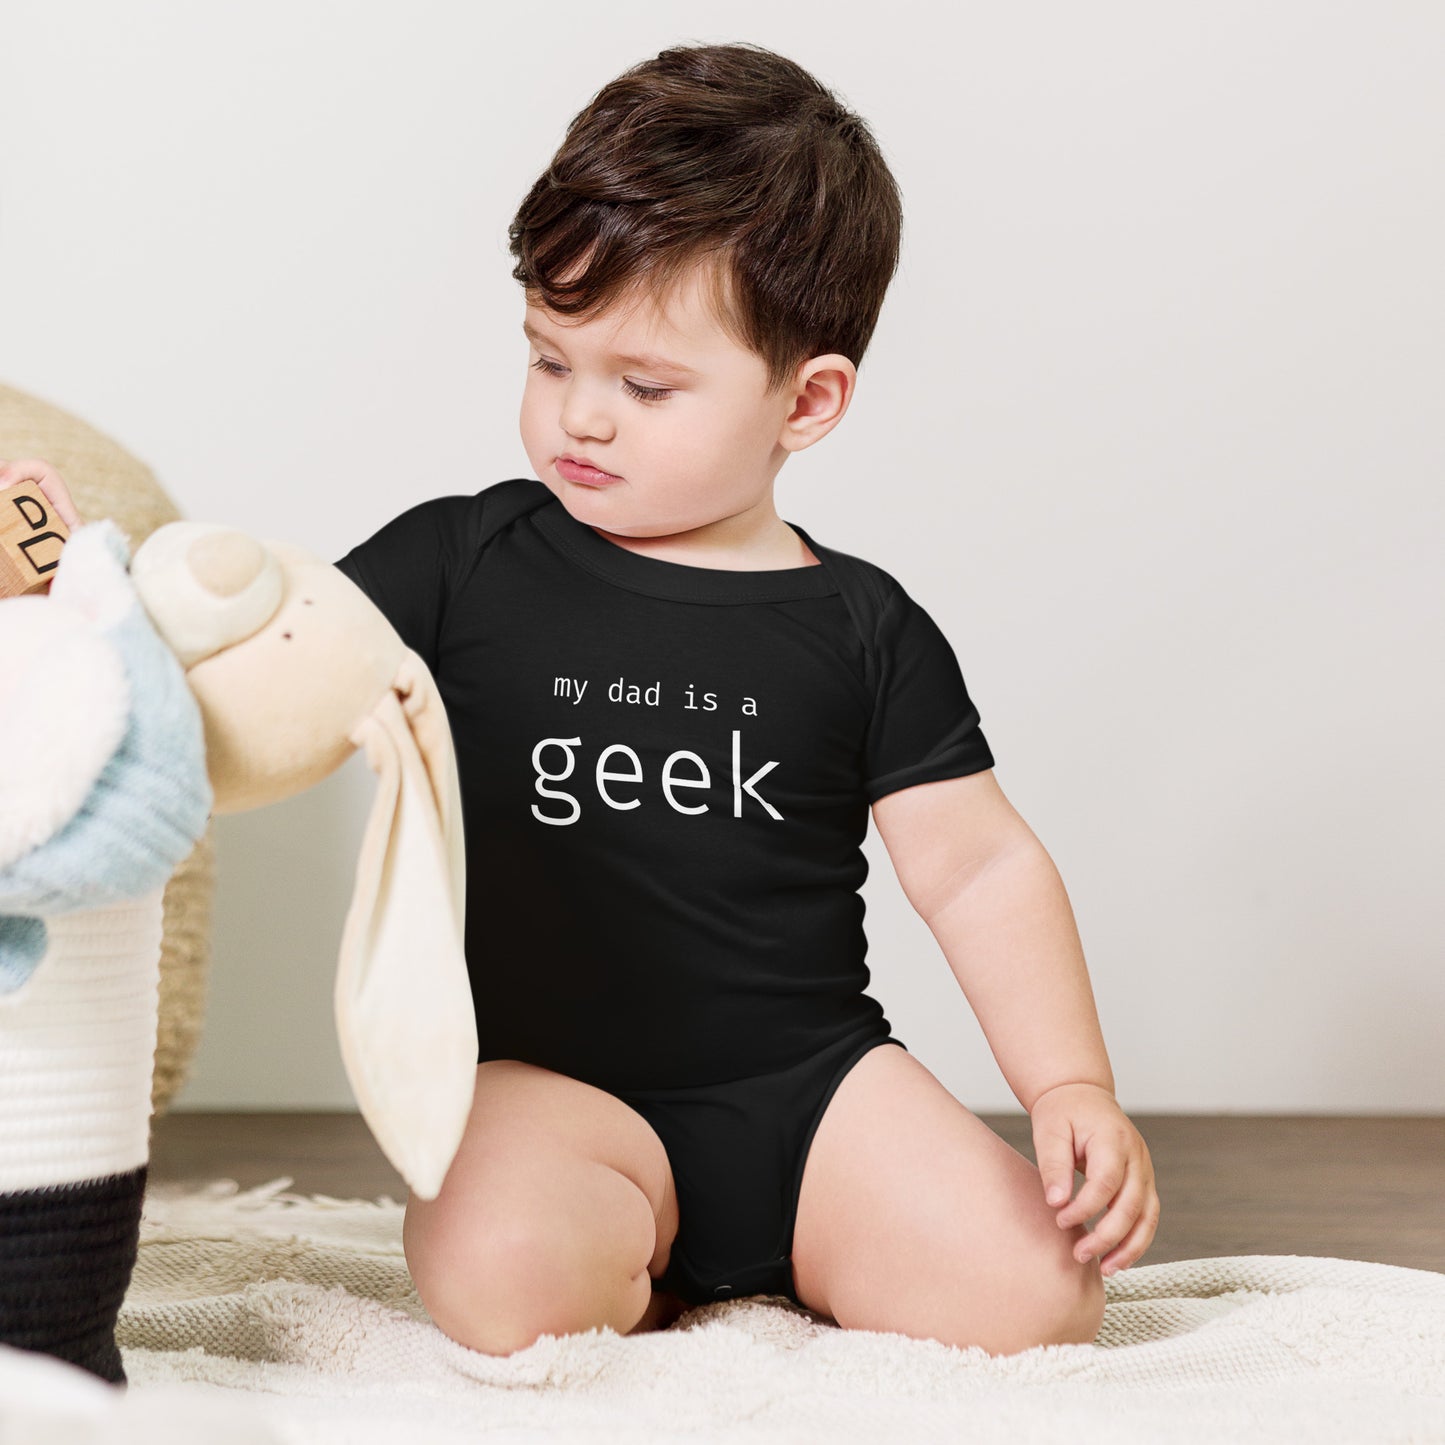 My dad is a geek - White Text - Baby short sleeve one piece